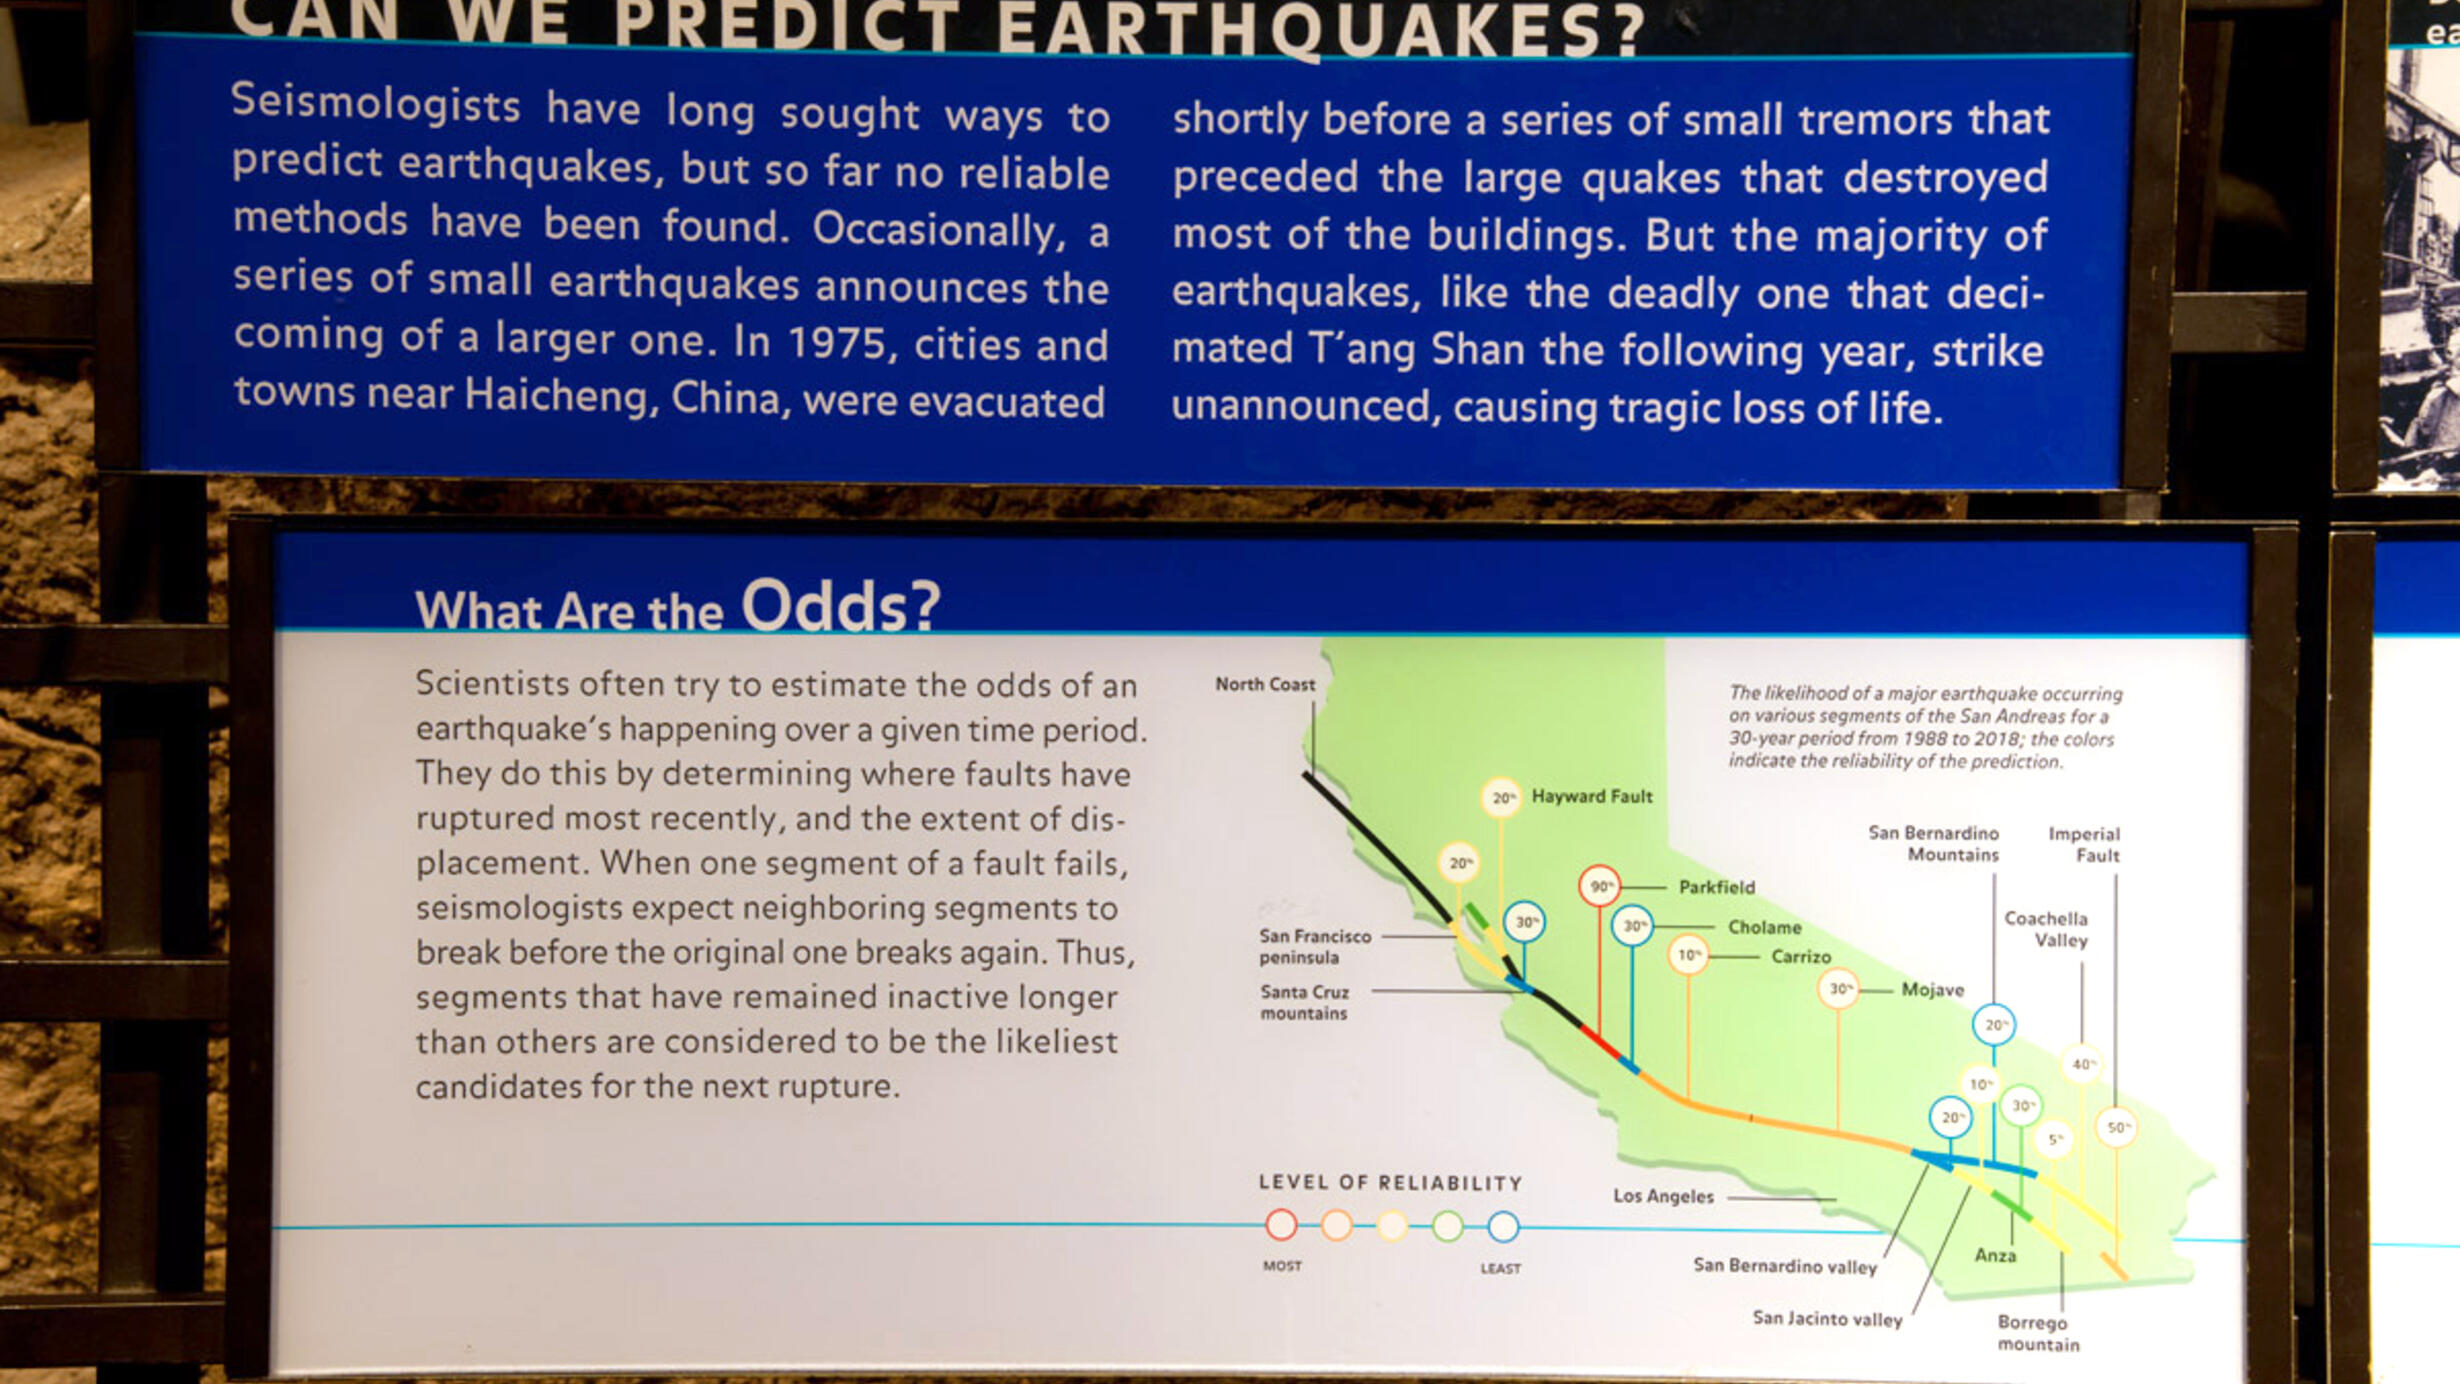 Can We Predict Earthquakes?